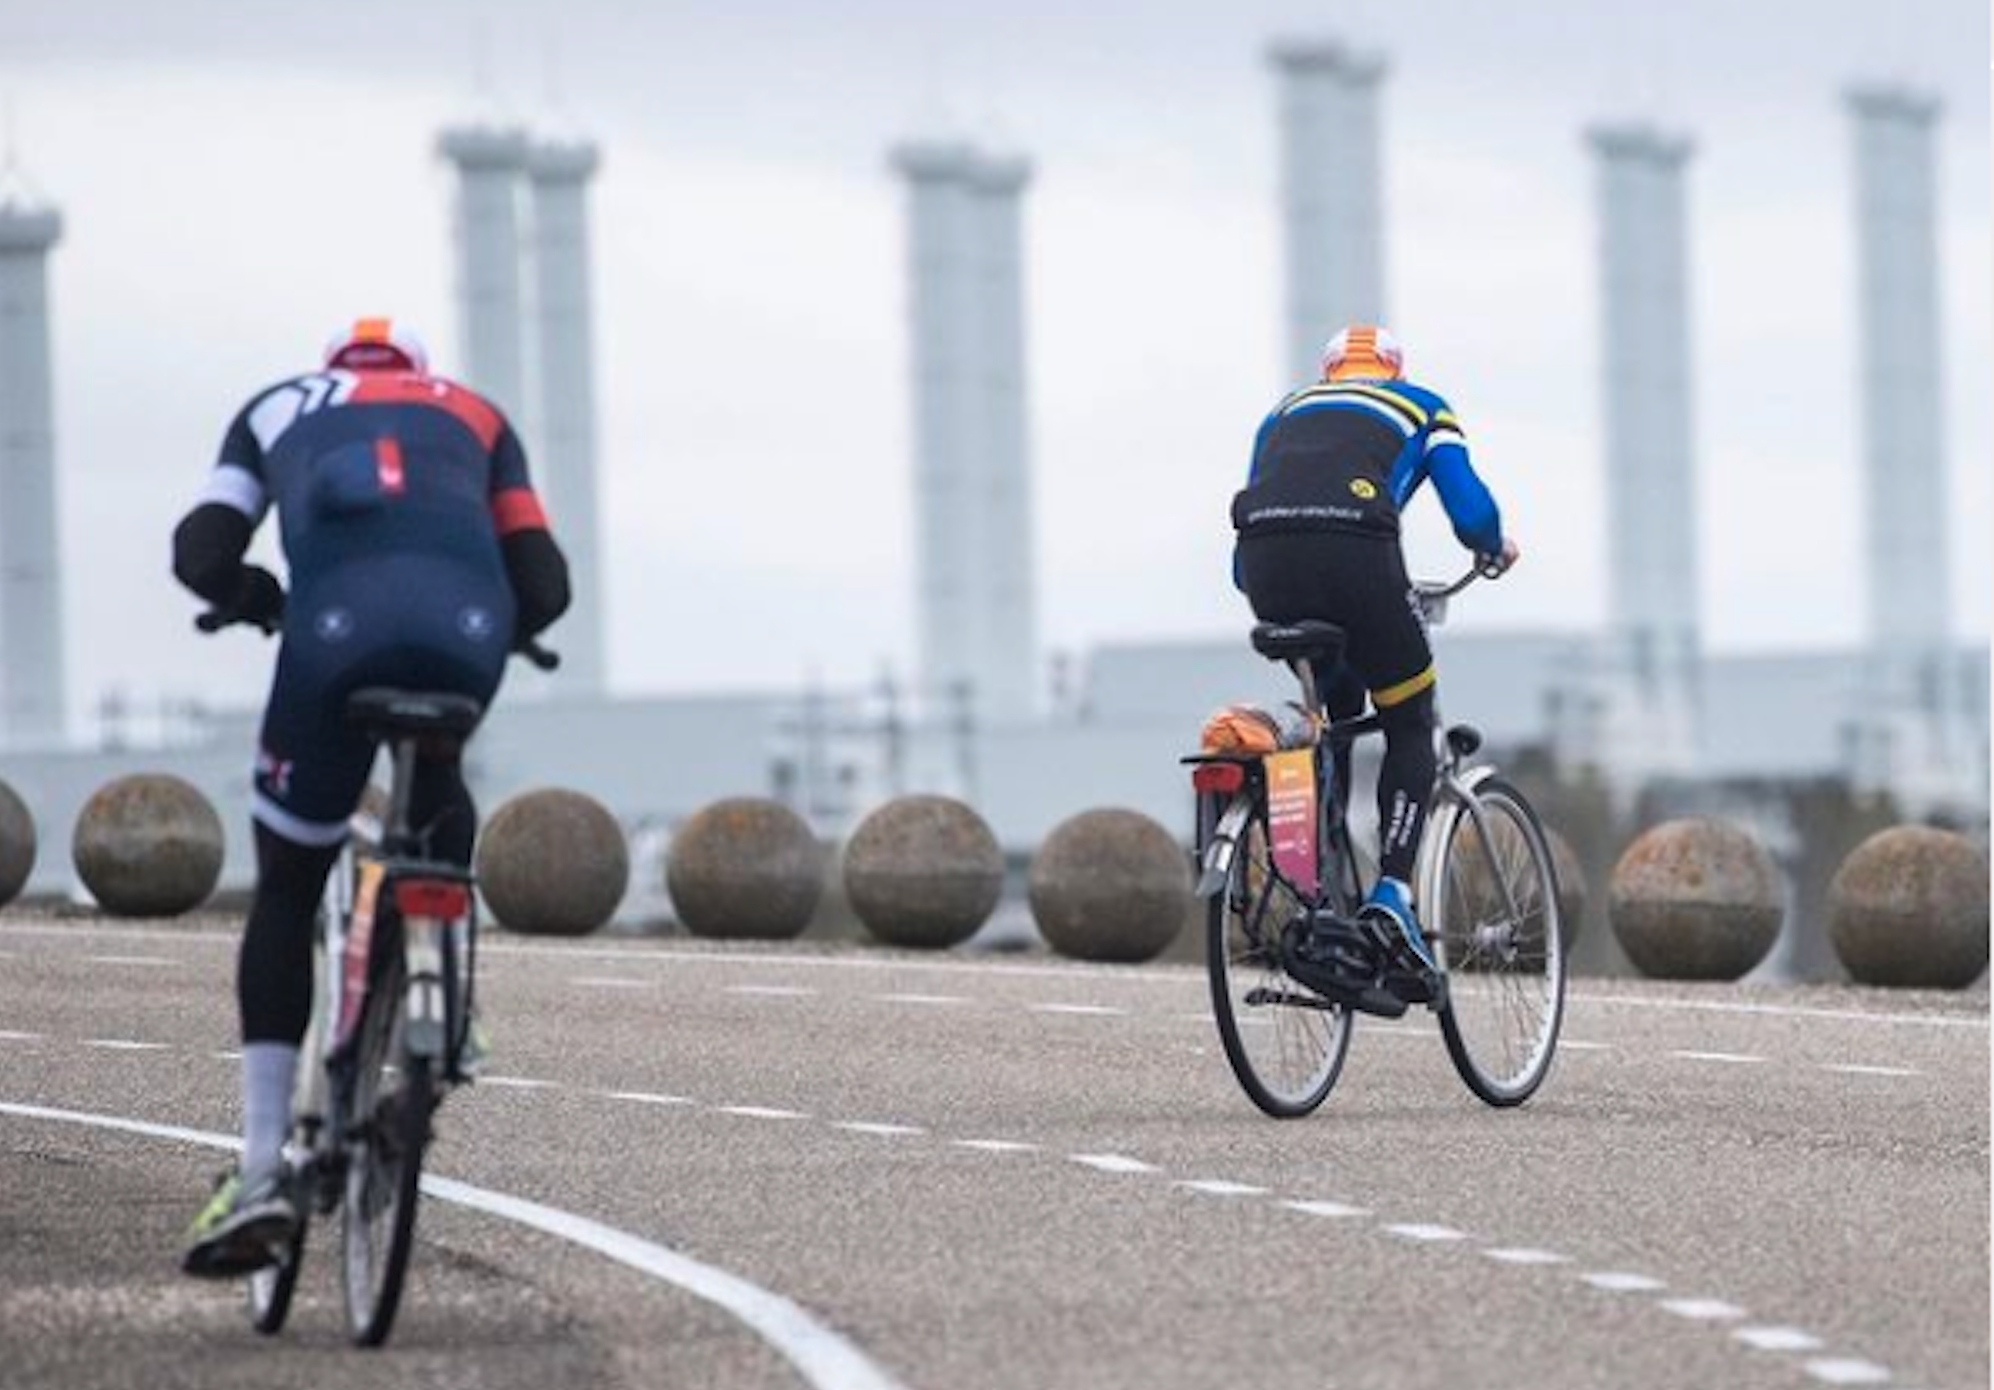 Riders struggle against a headwind on the Eastern Scheldt Storm Barrier during an edition of Tegenwindfietsen.